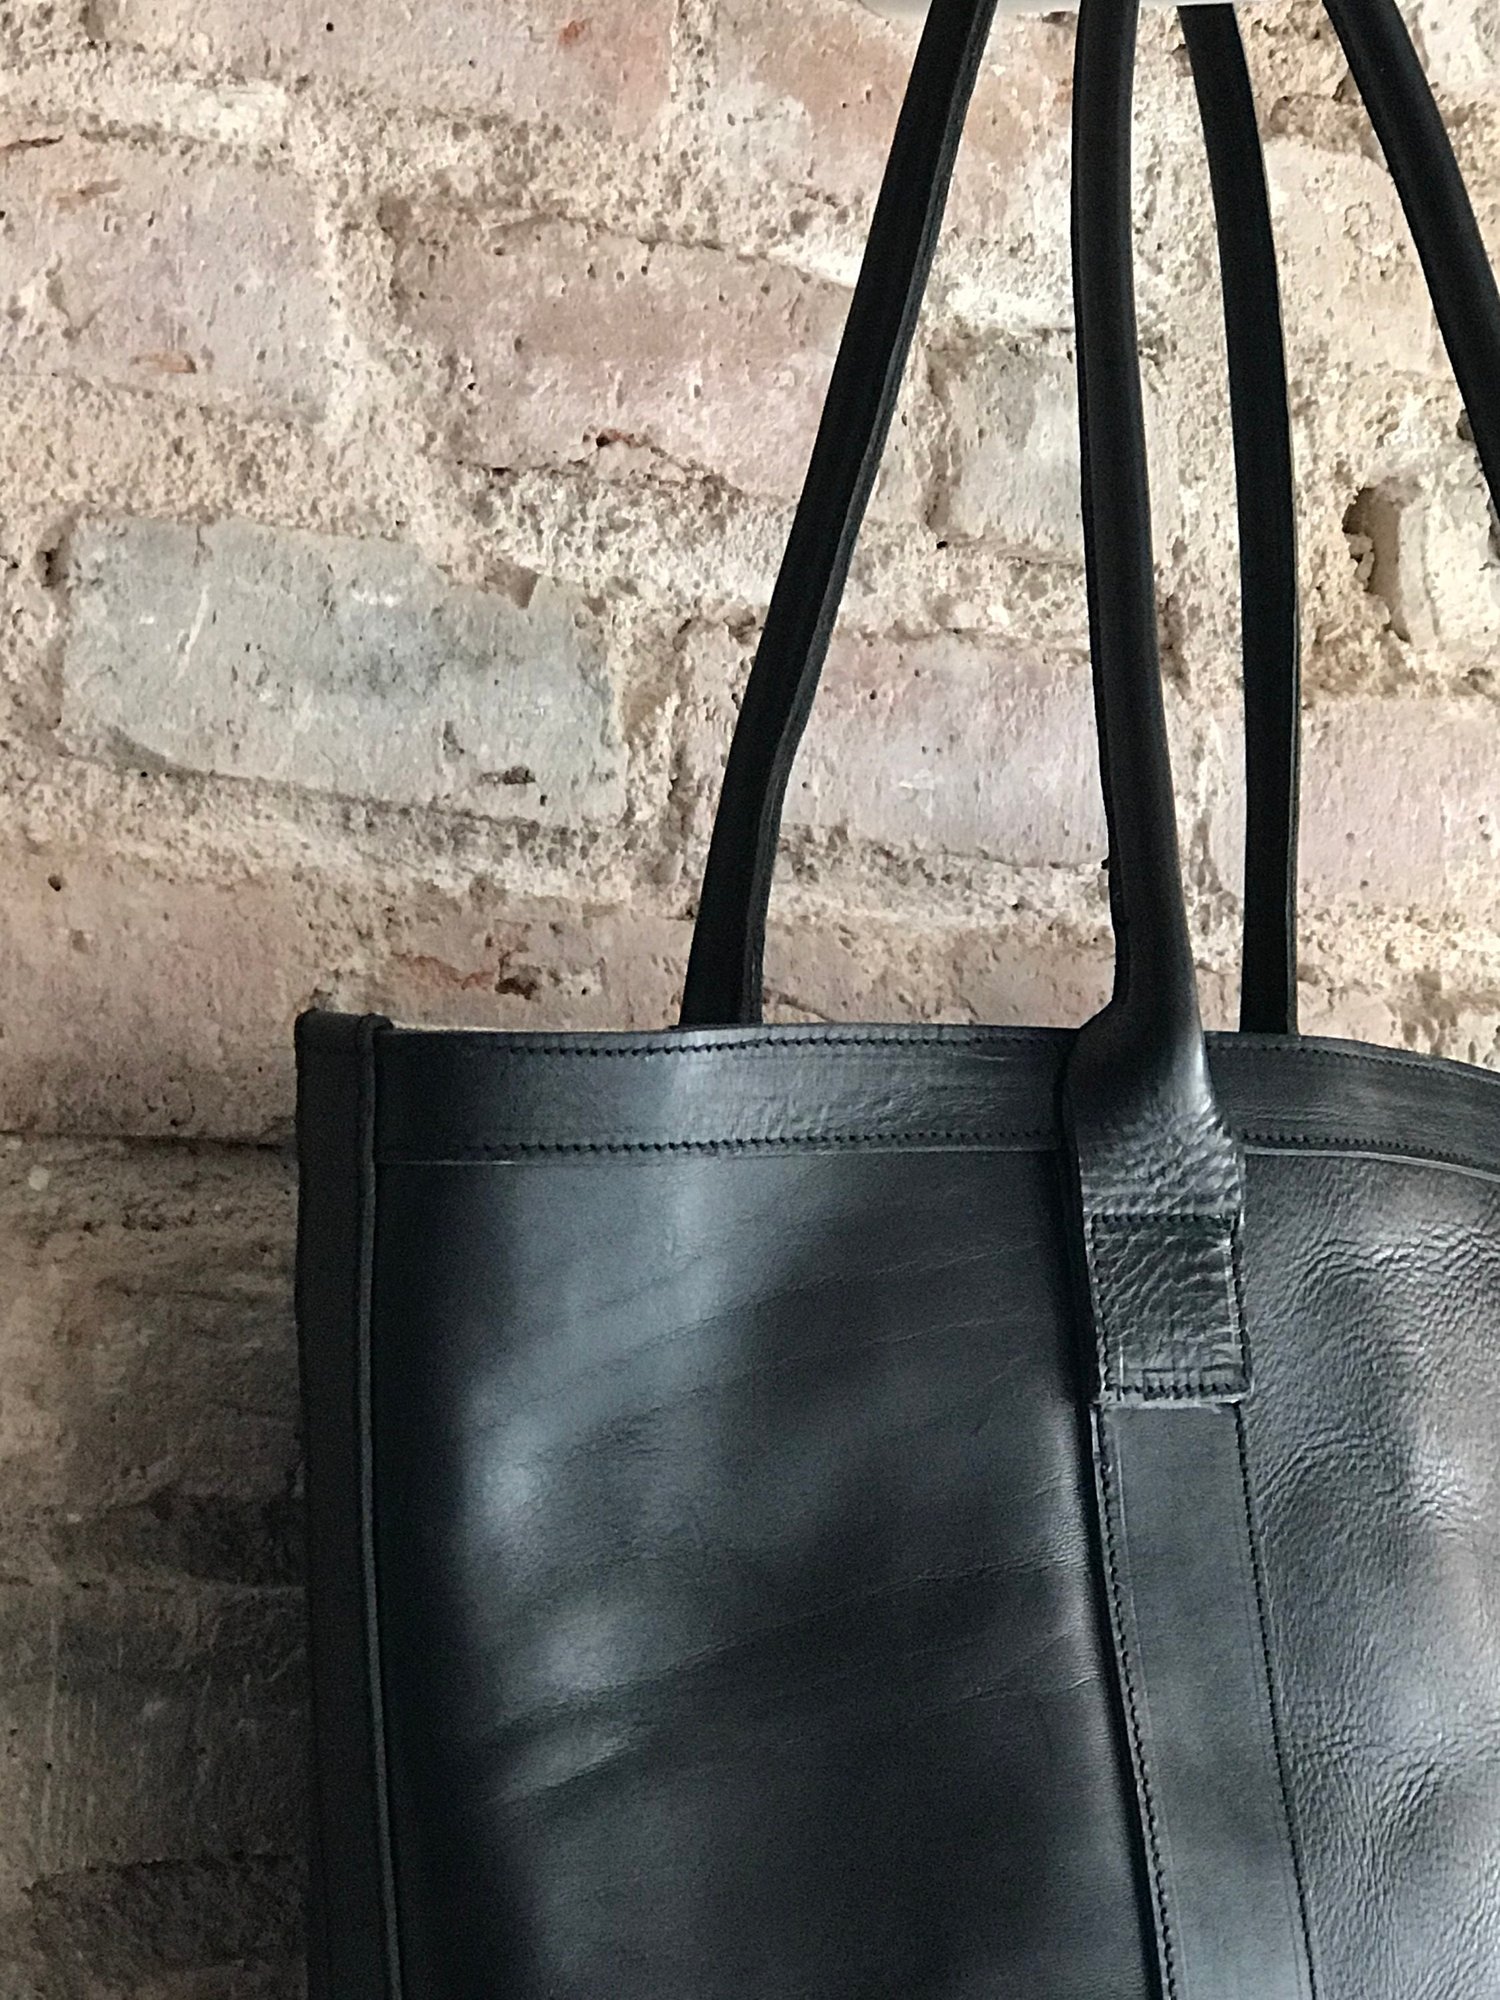 Black Leather Tote Bag with Zipper and Inside Lining. Leather Purse. Handmade.